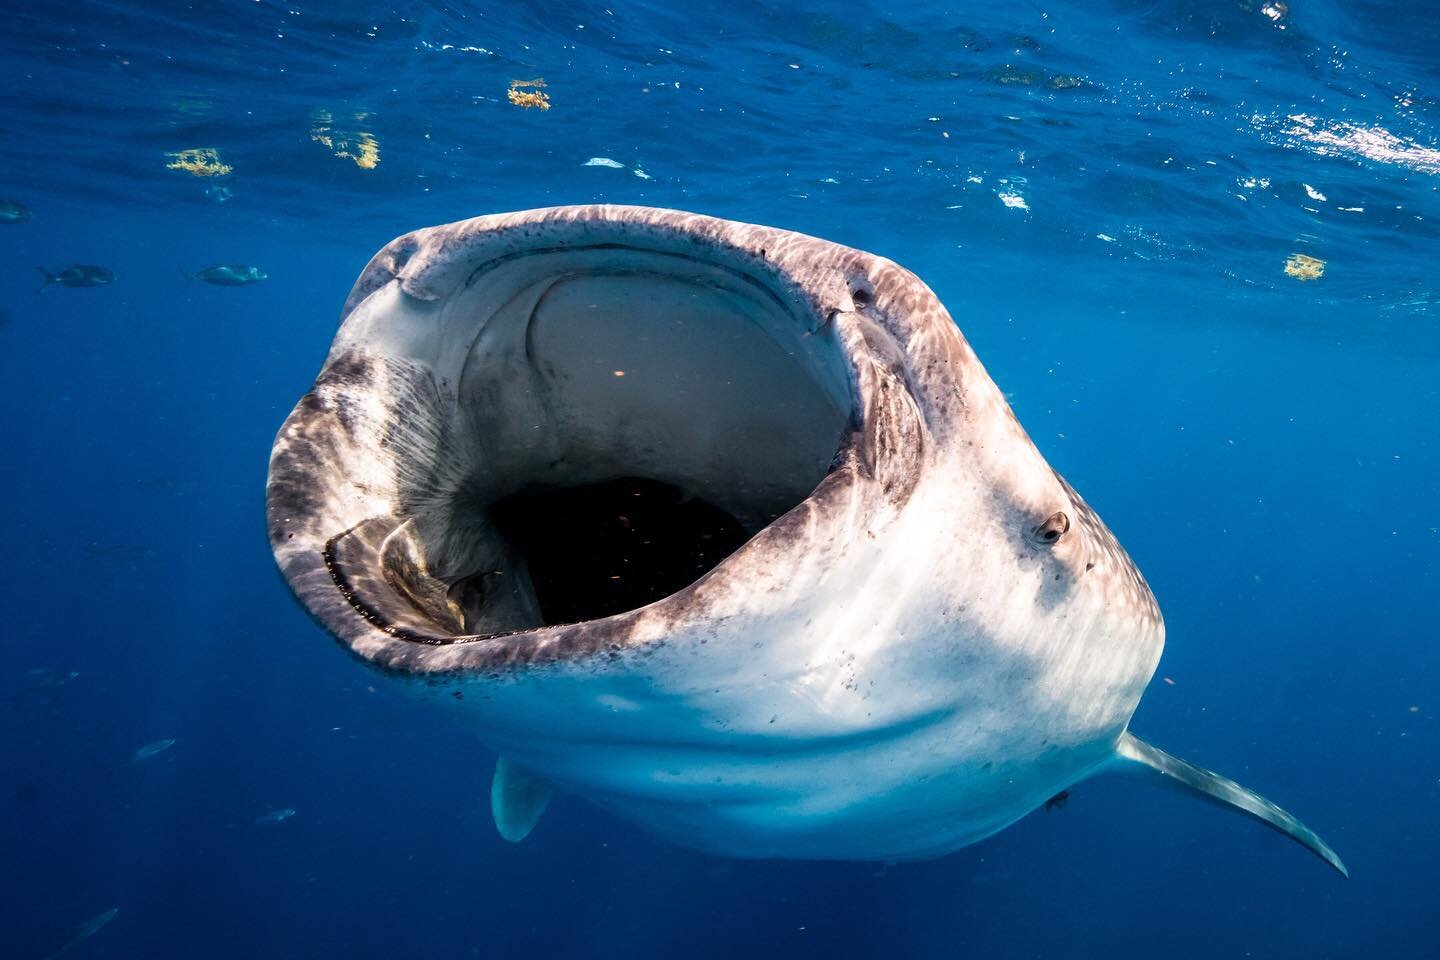 It&rsquo;s full moon tomorrow and we expect to see loads of gentle giants feeding 🌝🐋🦈
.
The season ends mid September, don&rsquo;t wait an longer and if you around DM me to go on an epic whale sharks expedition!